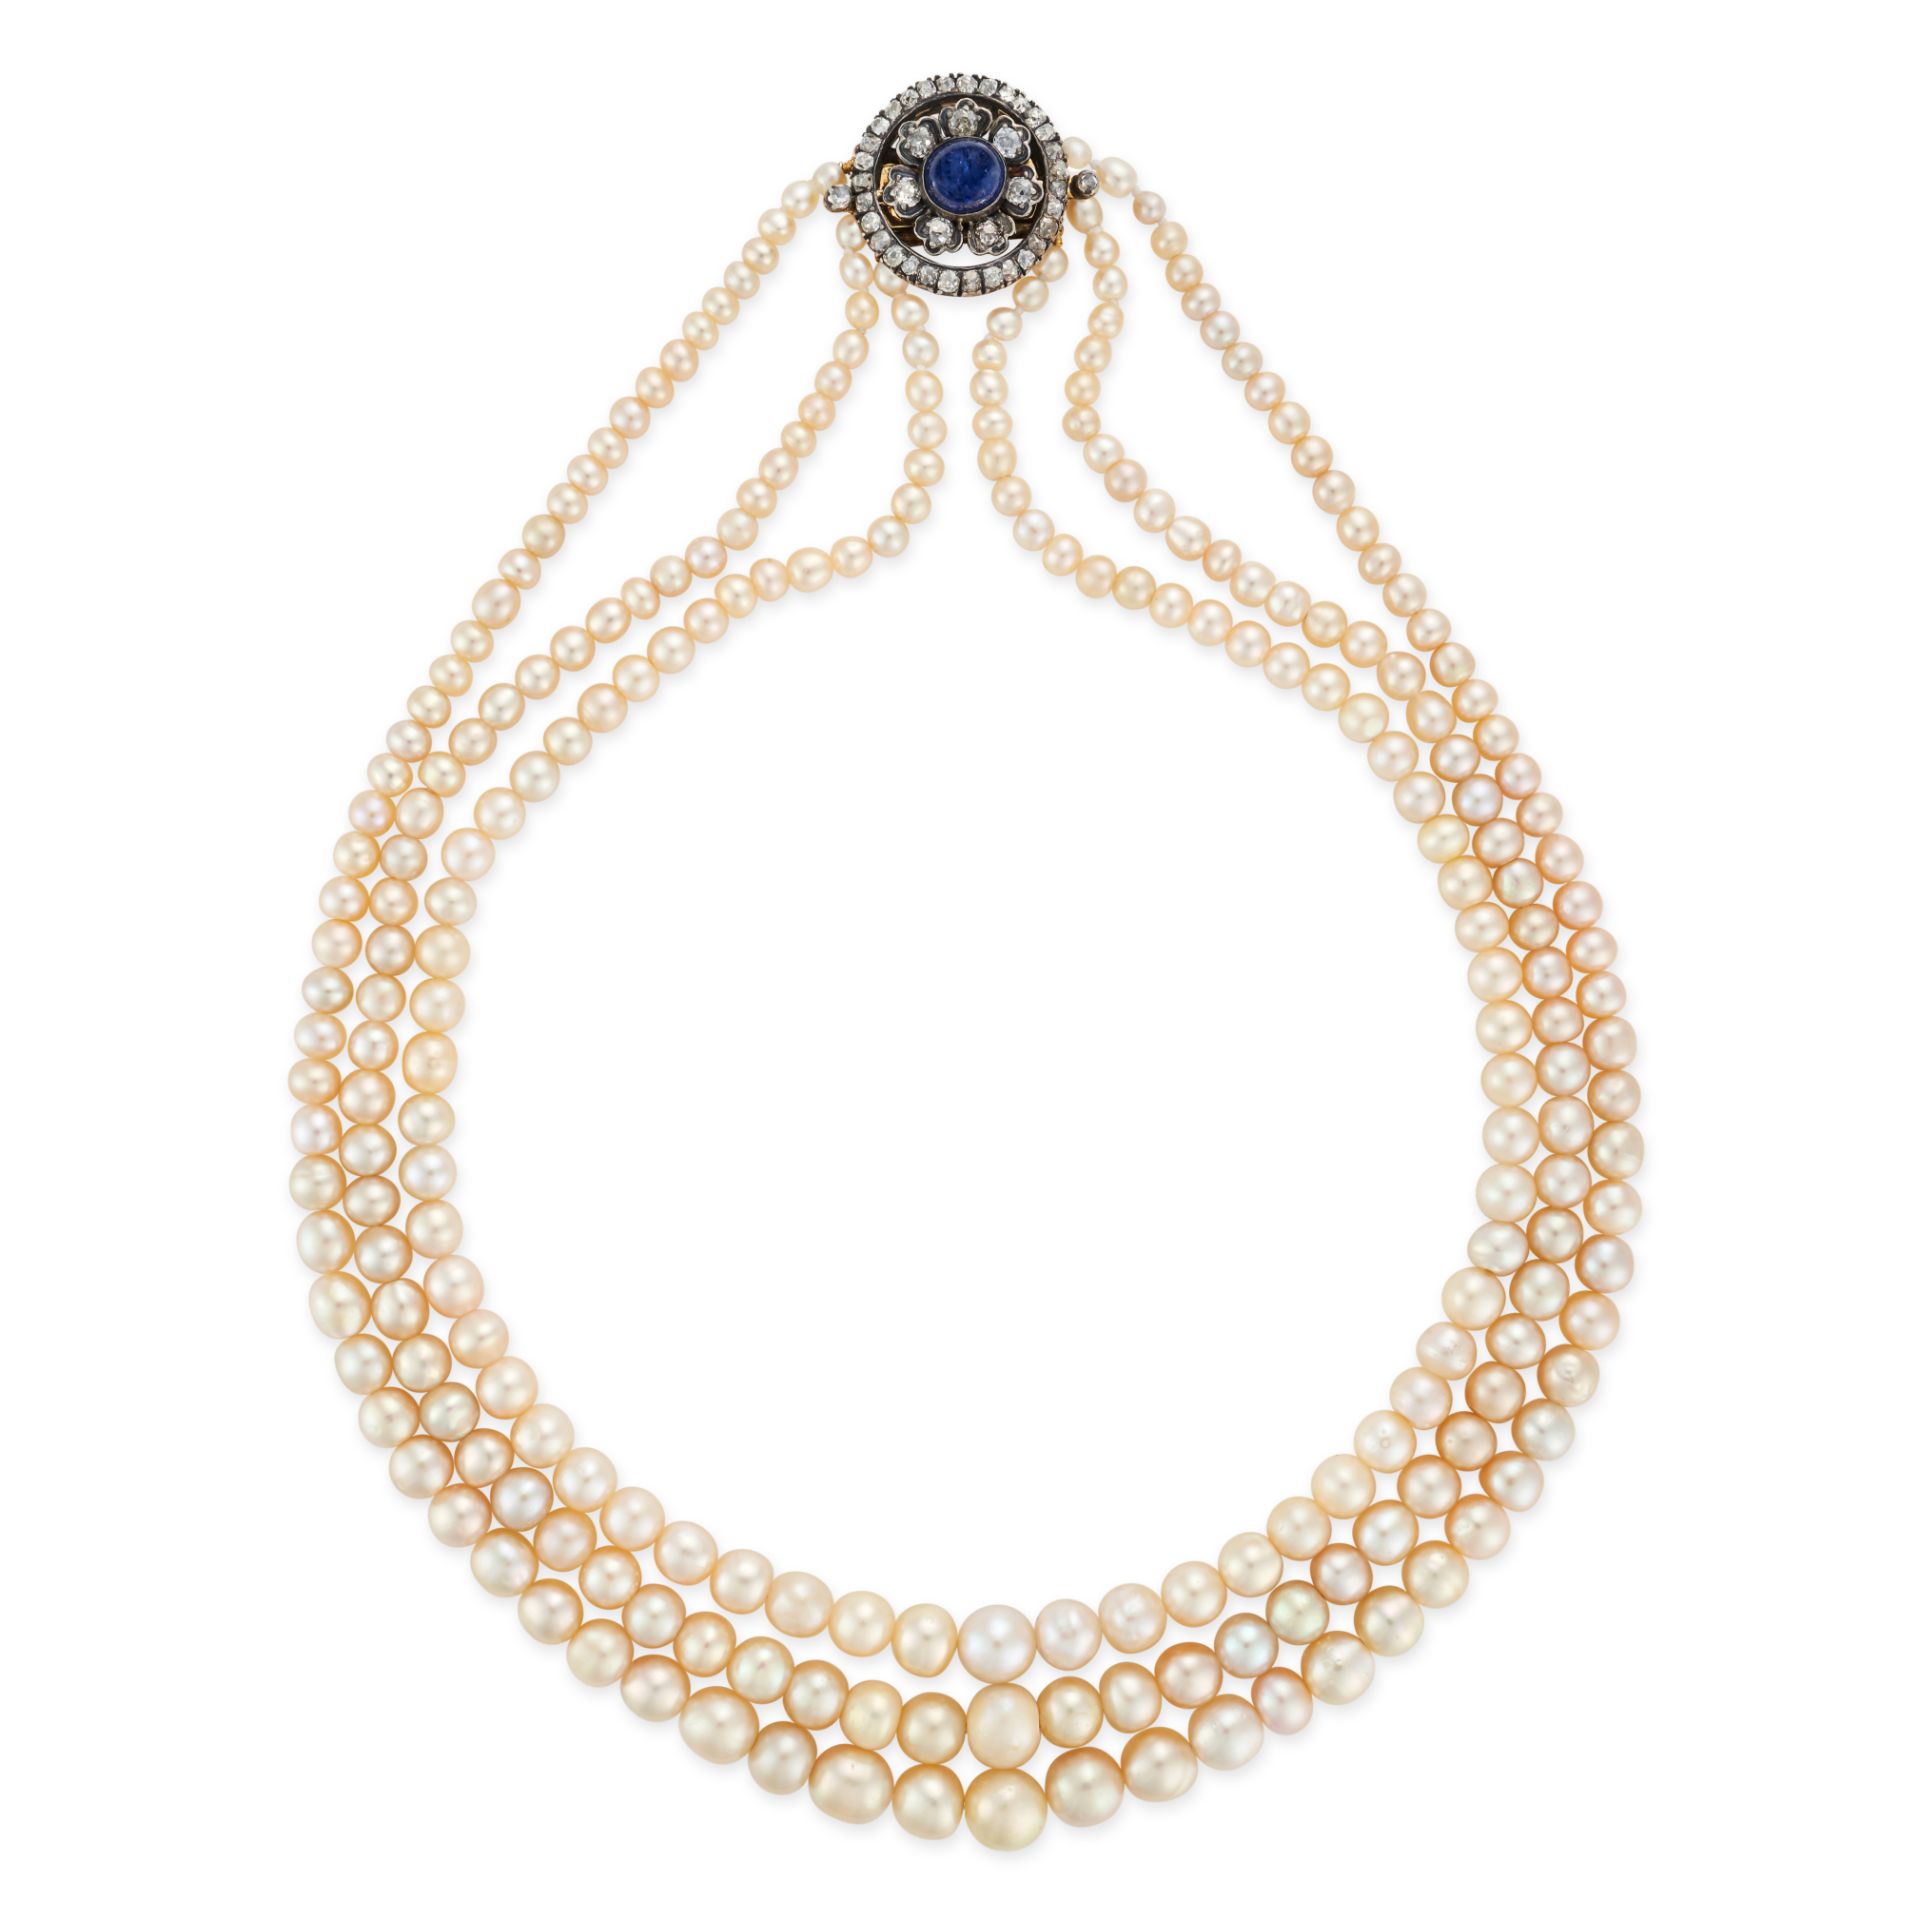 A THREE ROW NATURAL SALTWATER PEARL, SAPPHIRE AND DIAMOND NECKLACE comprising three rows of gradu...